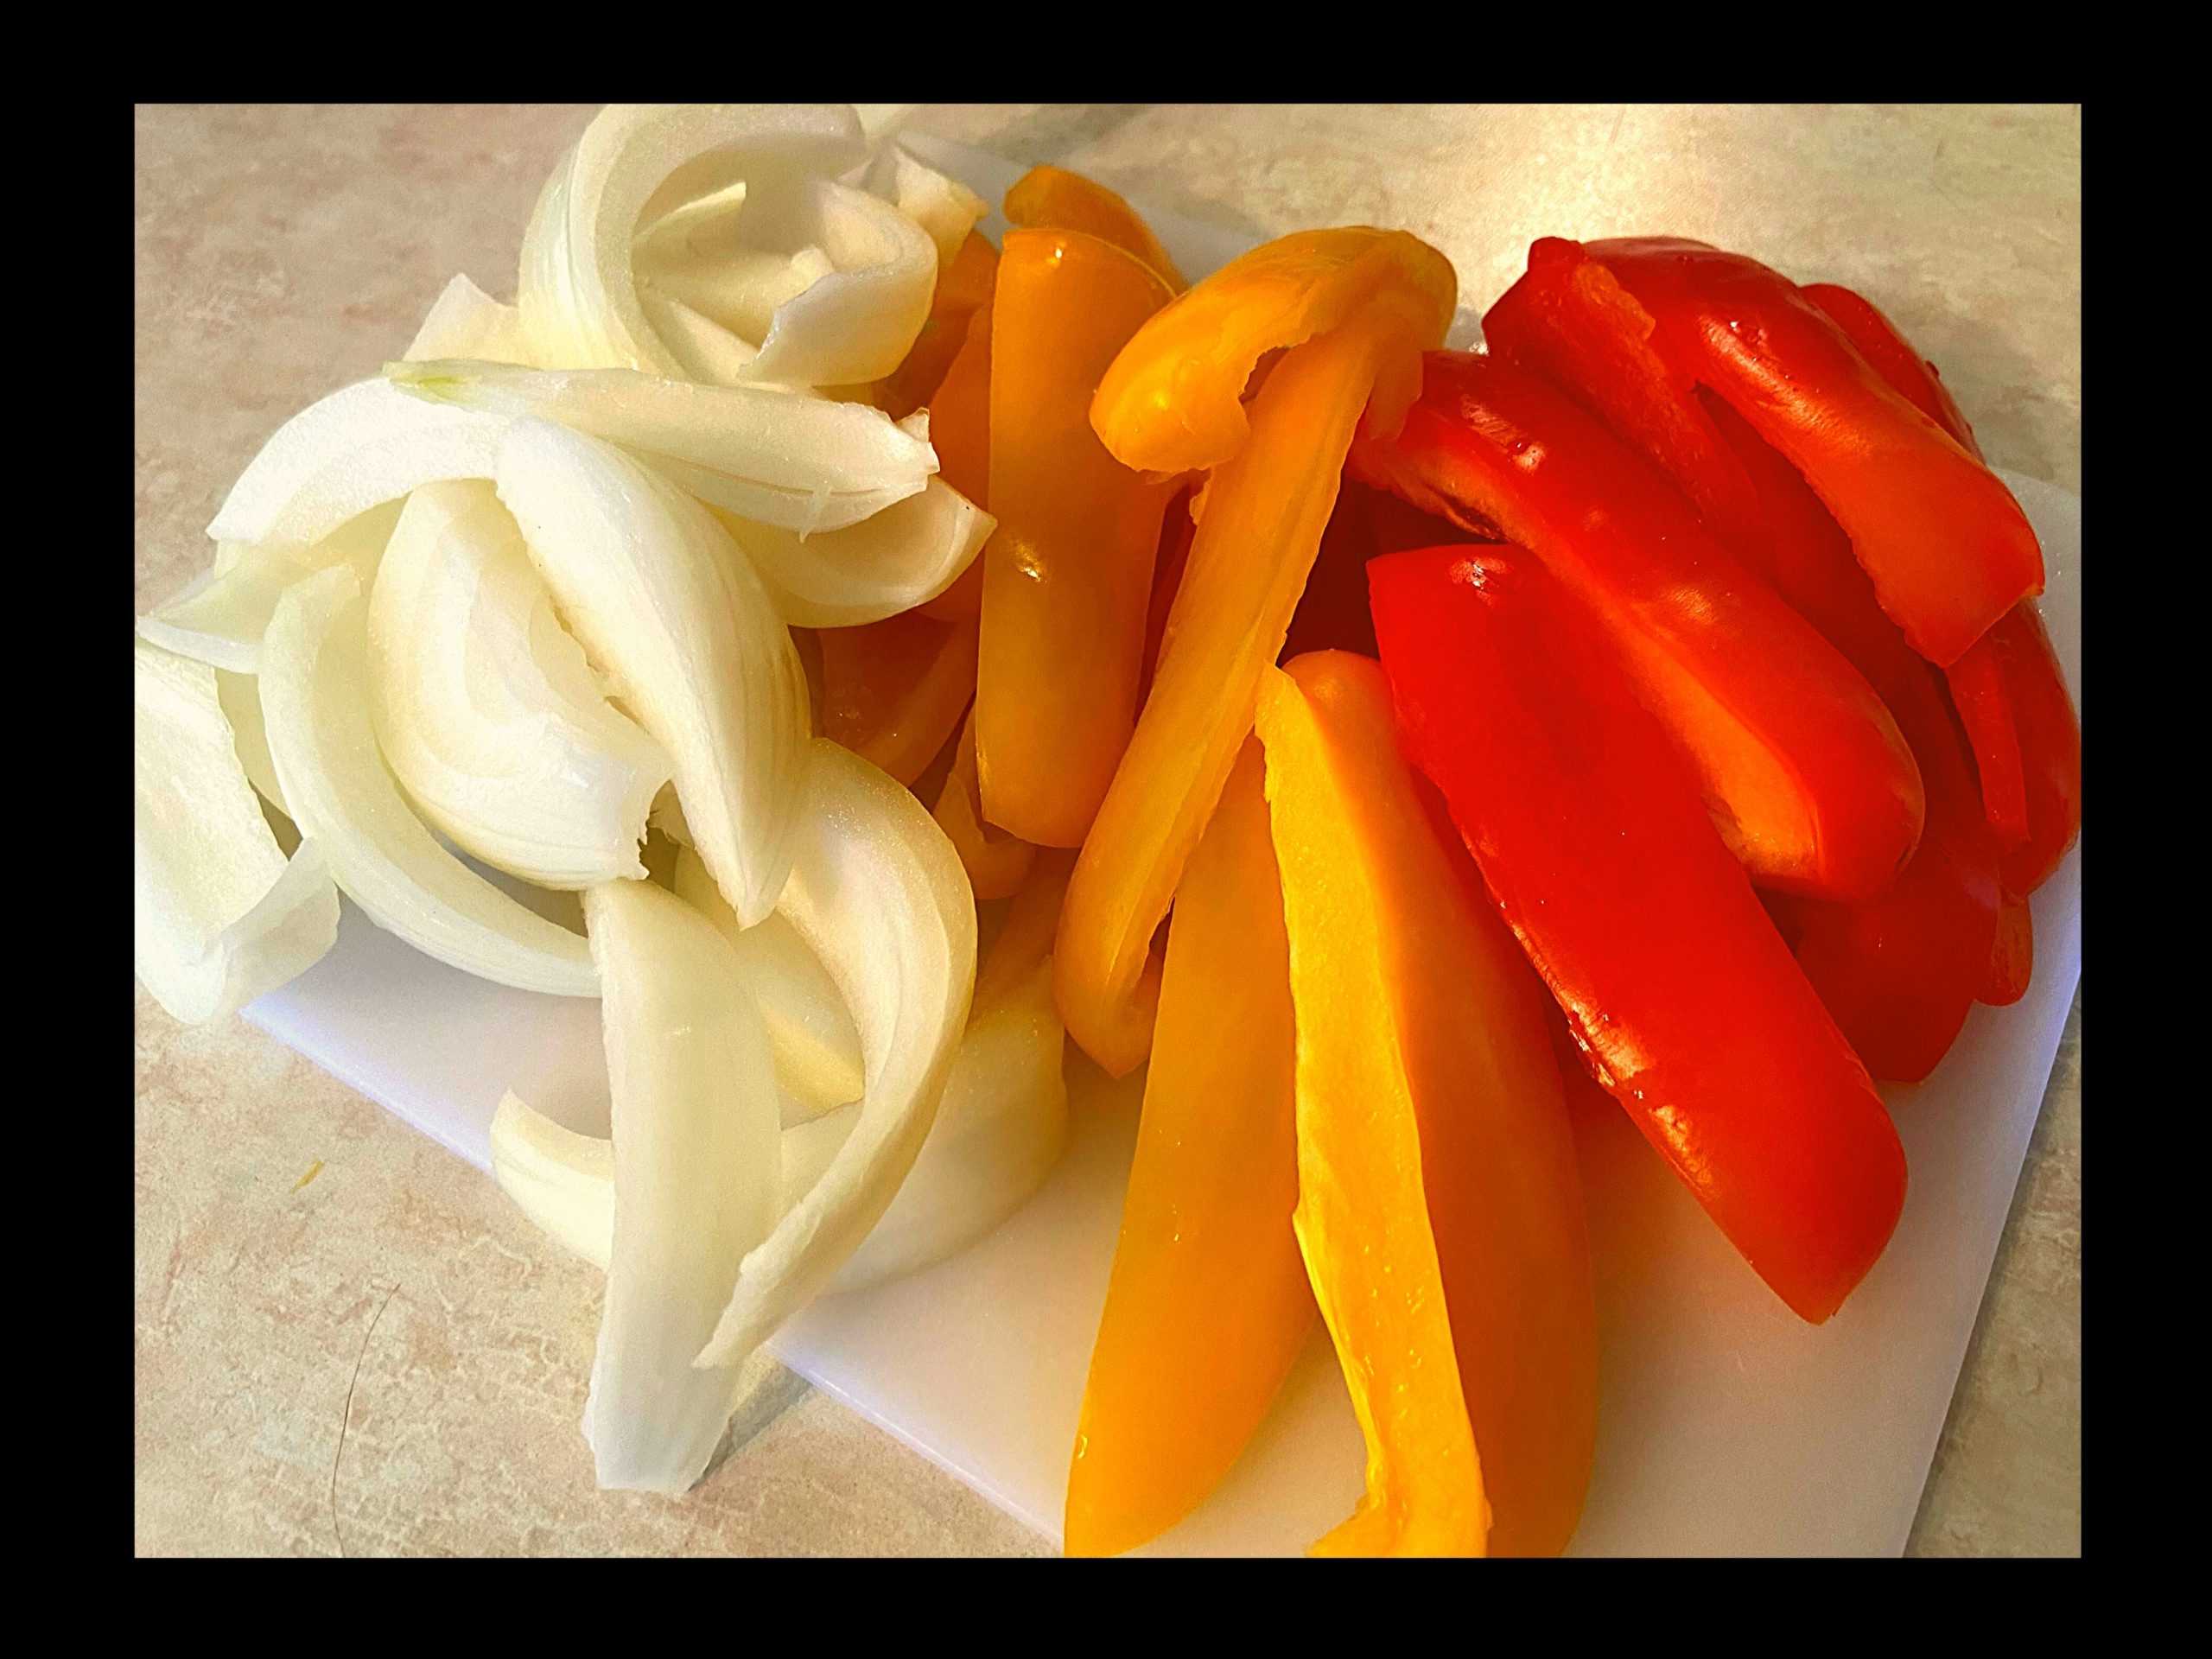 Red bell pepper, yellow bell pepper, and an onion sliced into 1 inch pieces on a white cutting board